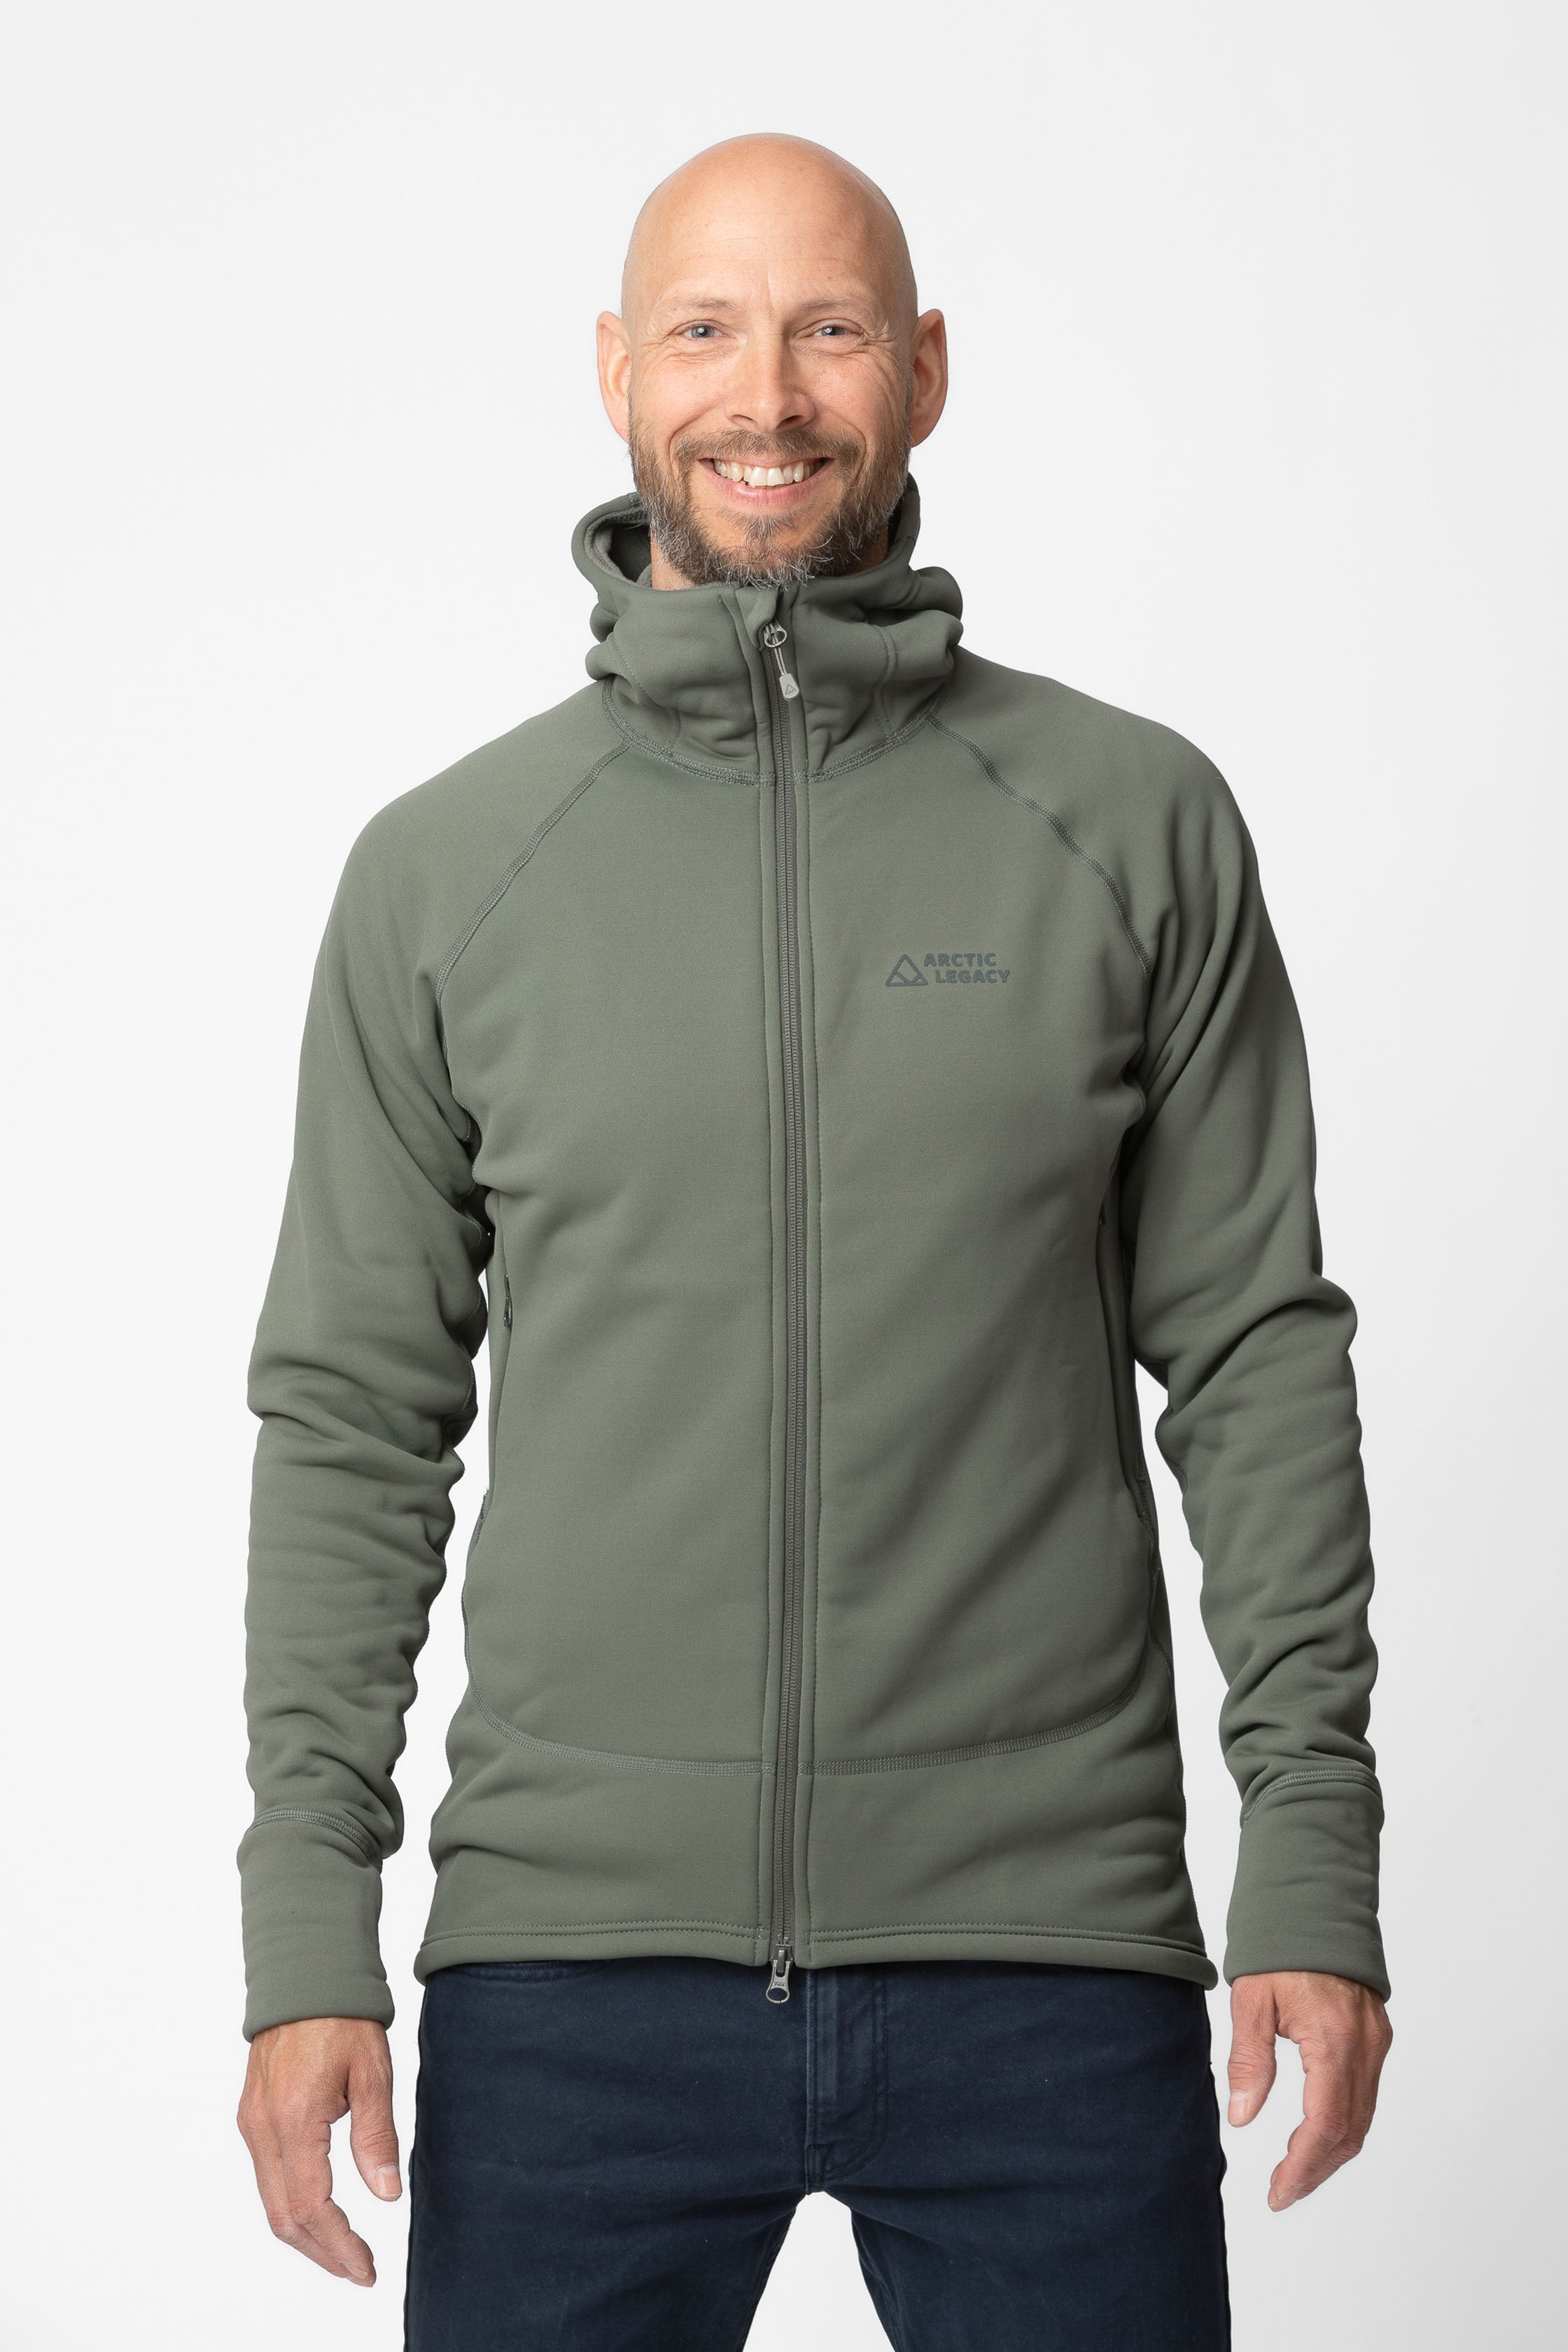 Eco friendly outdoor clothing for men